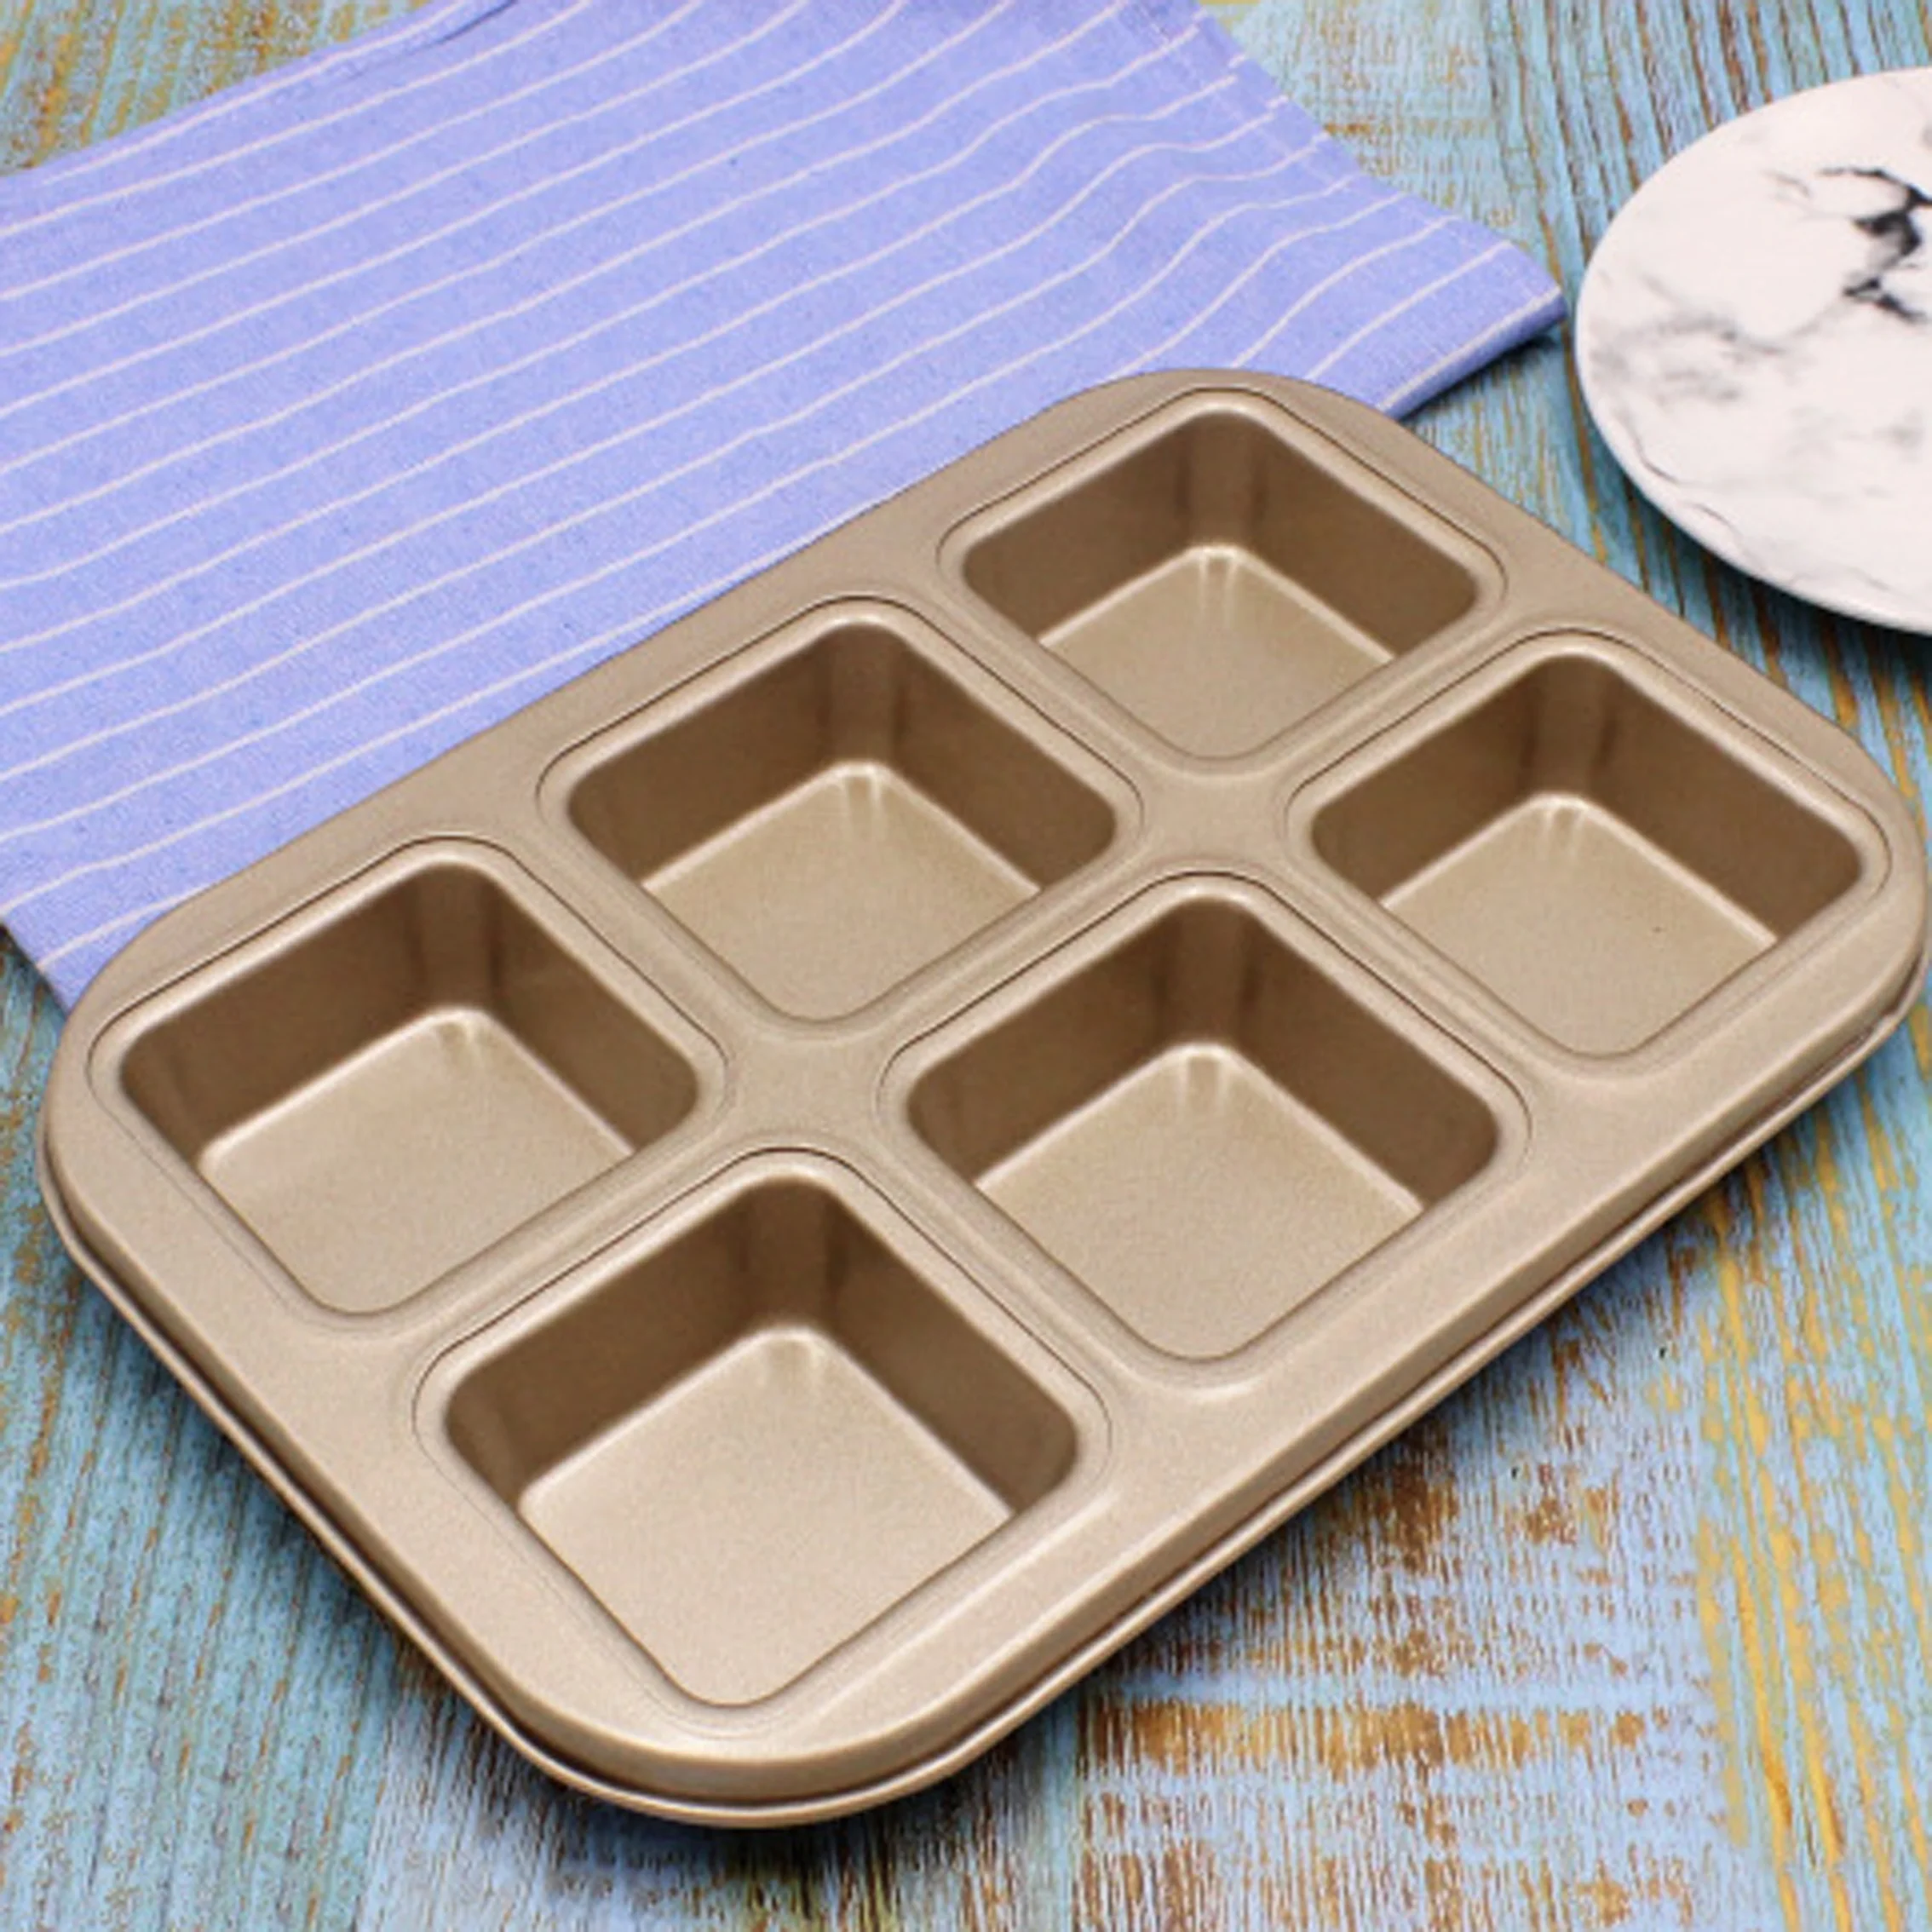 Hot Selling 6 Cavity Non Stick Carbon Steel Mini Loaf Pan For Diy Rectangle Baking Mold Cake Pan Mold Aluminum alloy cake molds